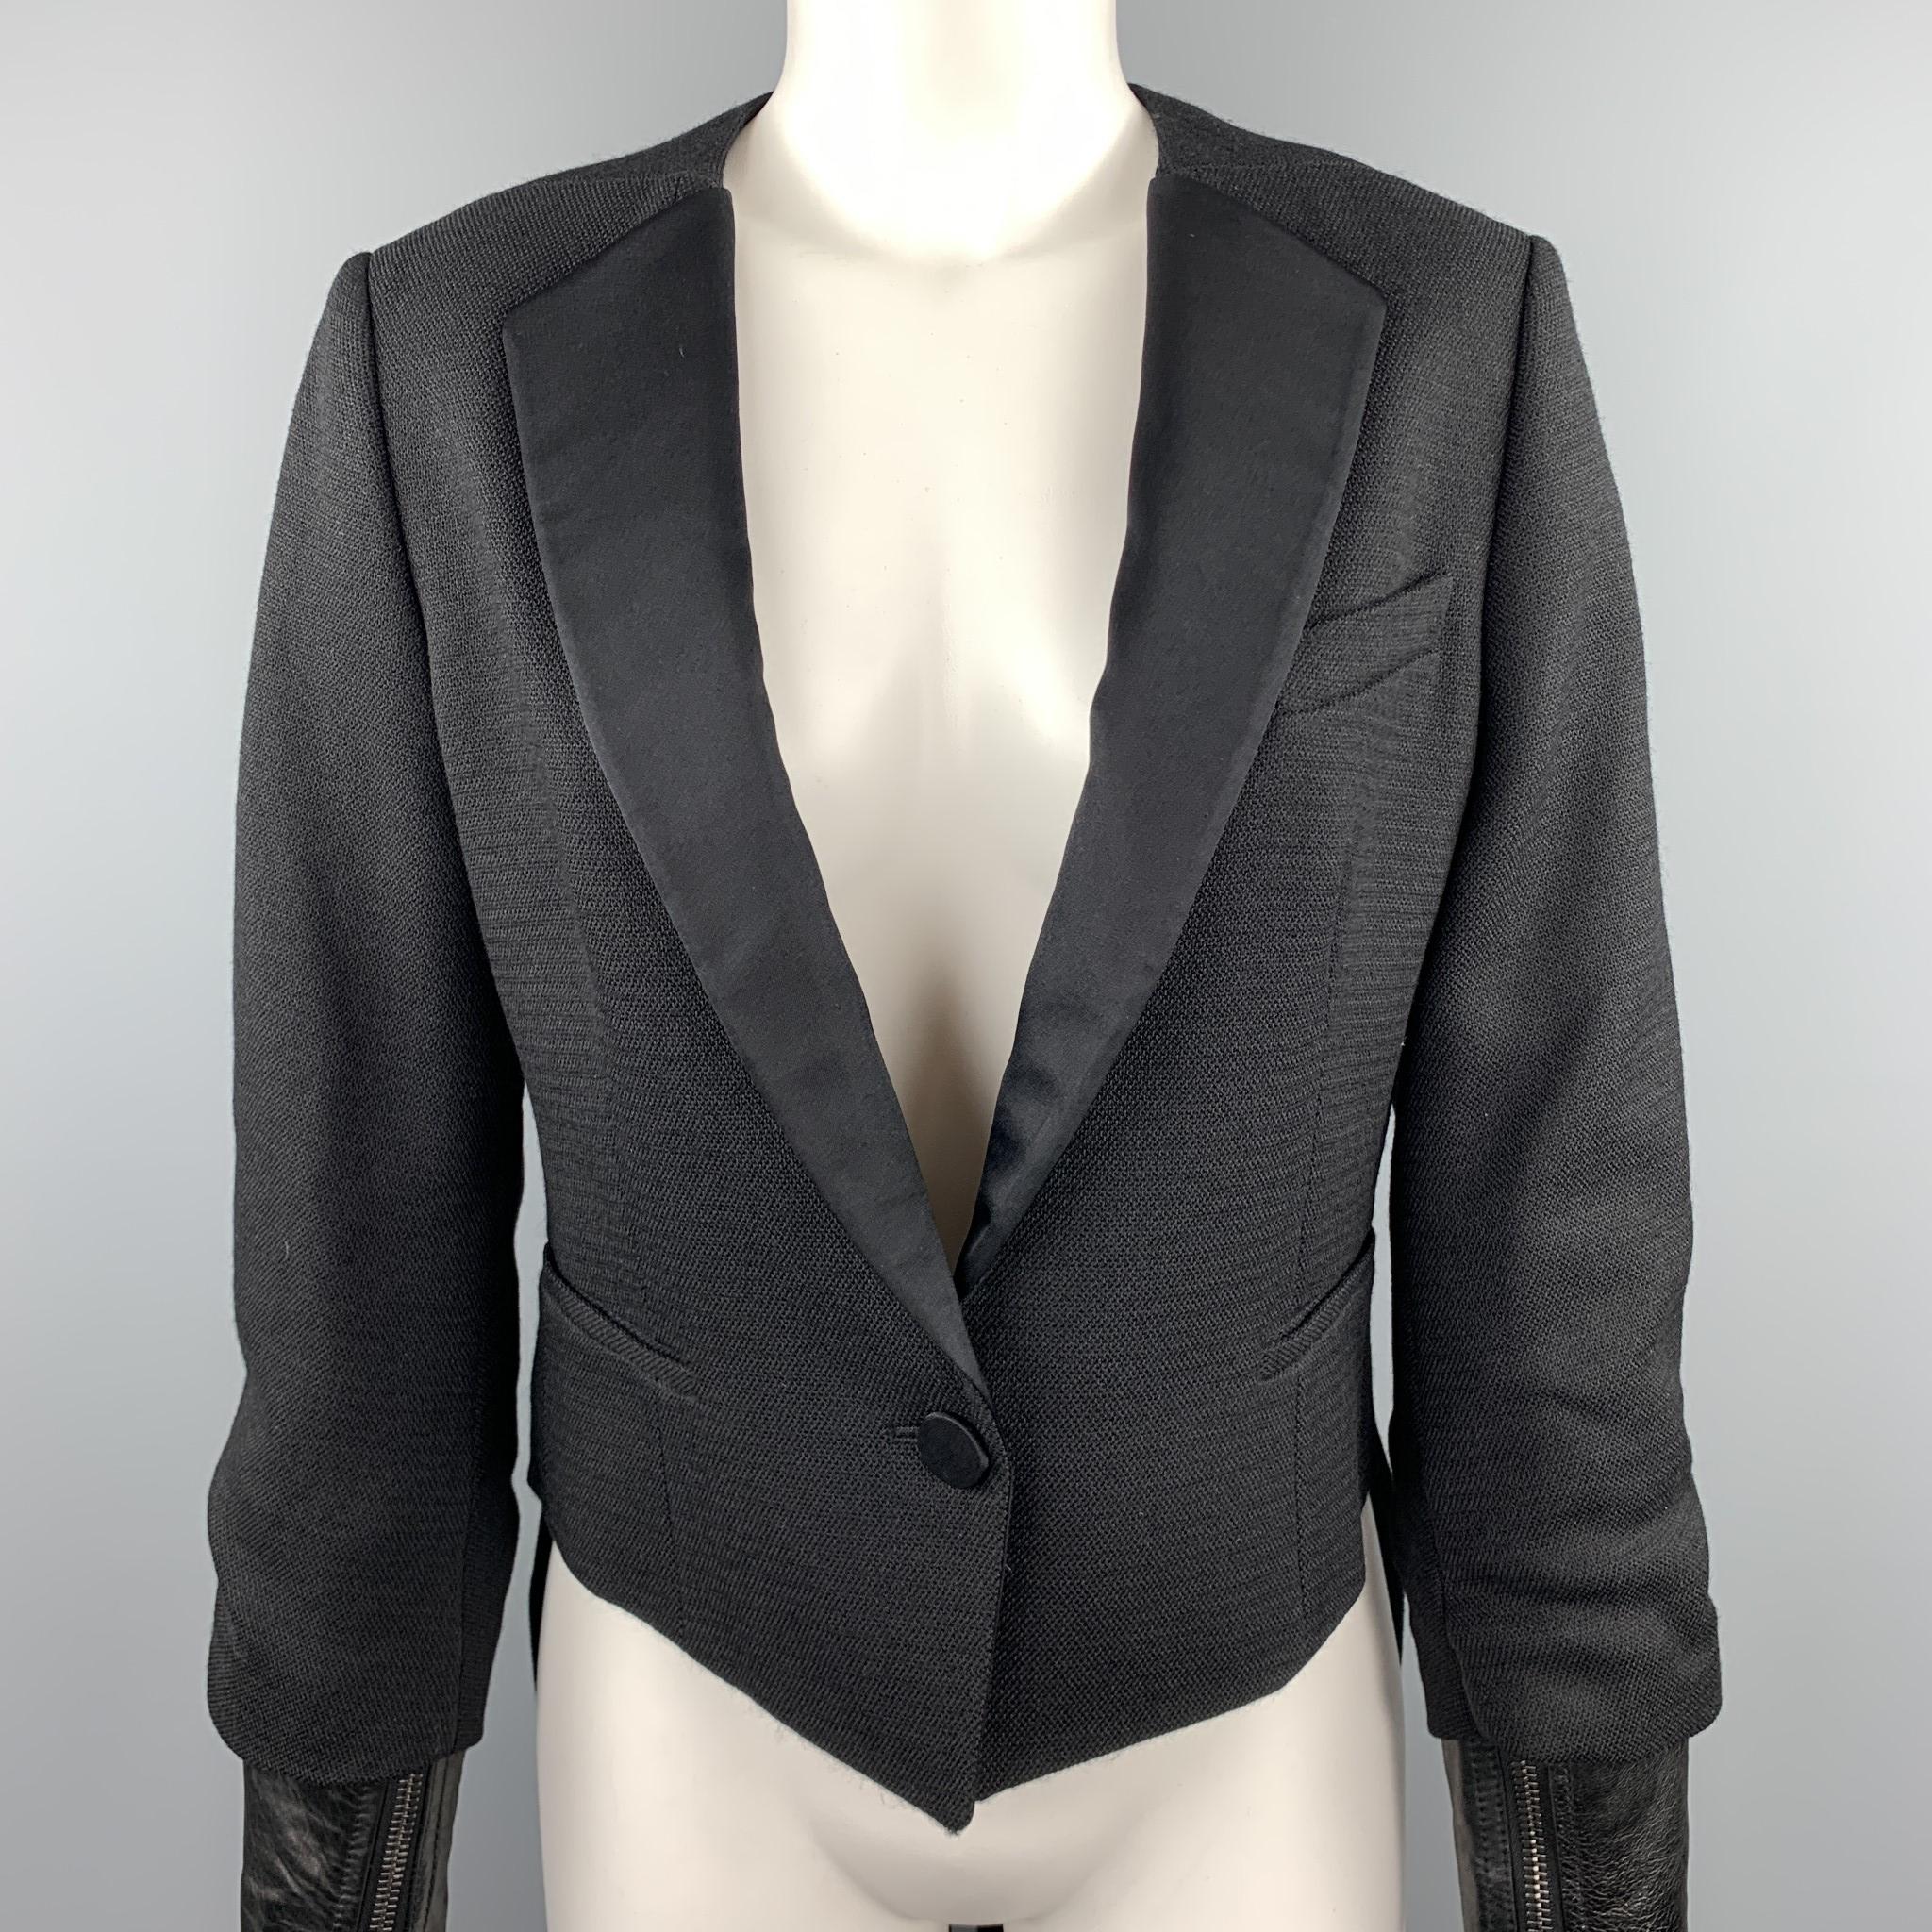 3.1 PHILLIP LIM jacket comes in woven wool with a collarless satin tuxedo notch lapel, single button front, double coat tails back, and detachable leather biker jacket cuffs. 

Excellent Pre-Owned Condition.
Marked: (no size)
Original Retail Price: